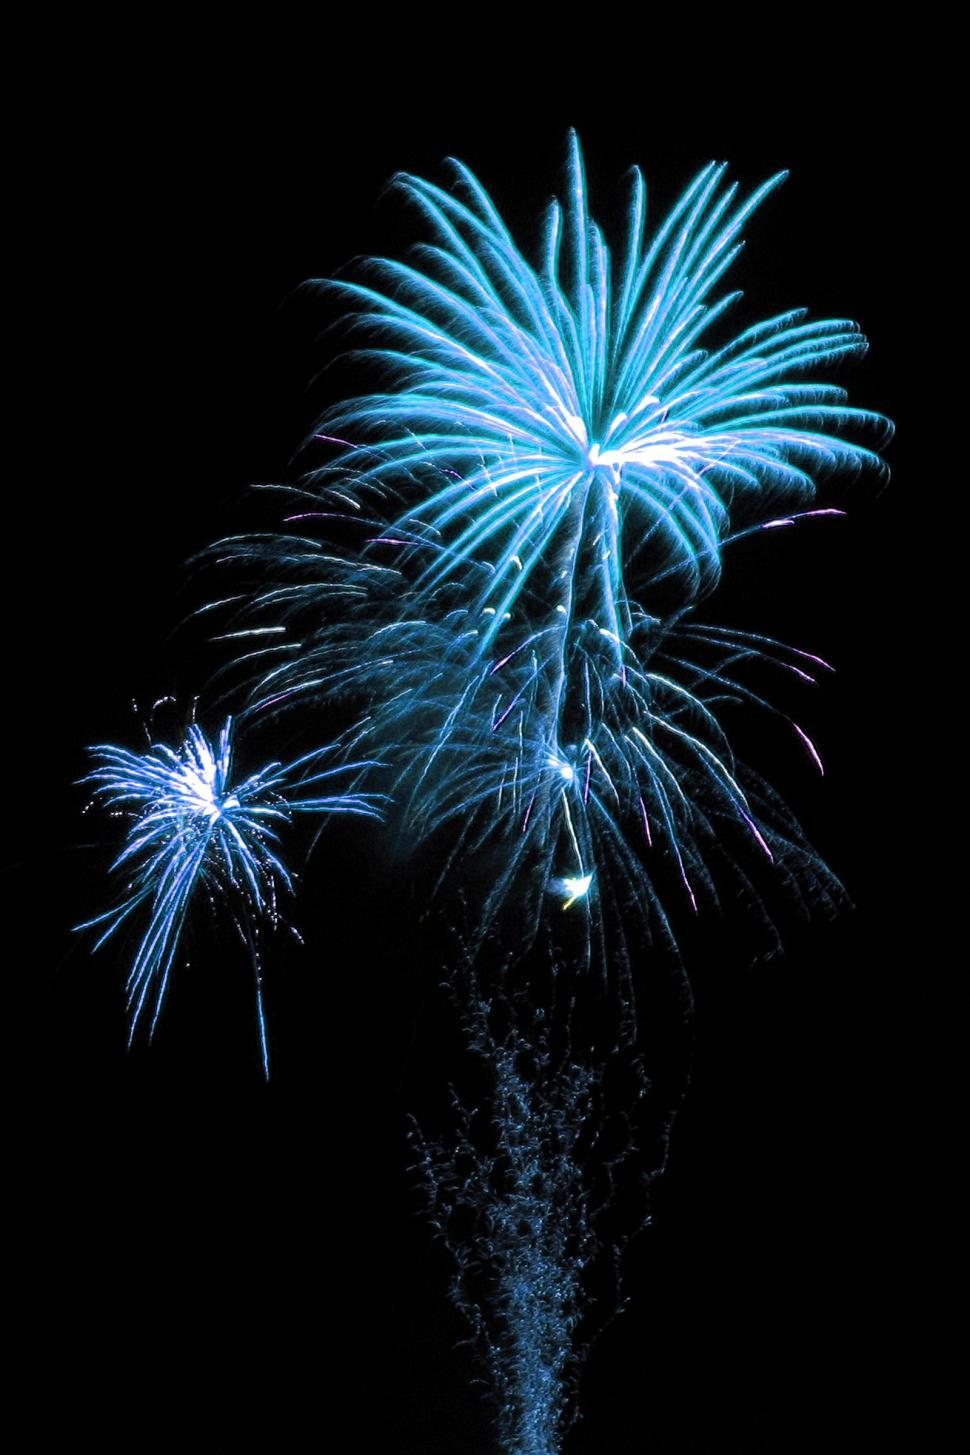 Free Image of Blue and White Firework Exploding in Night Sky 